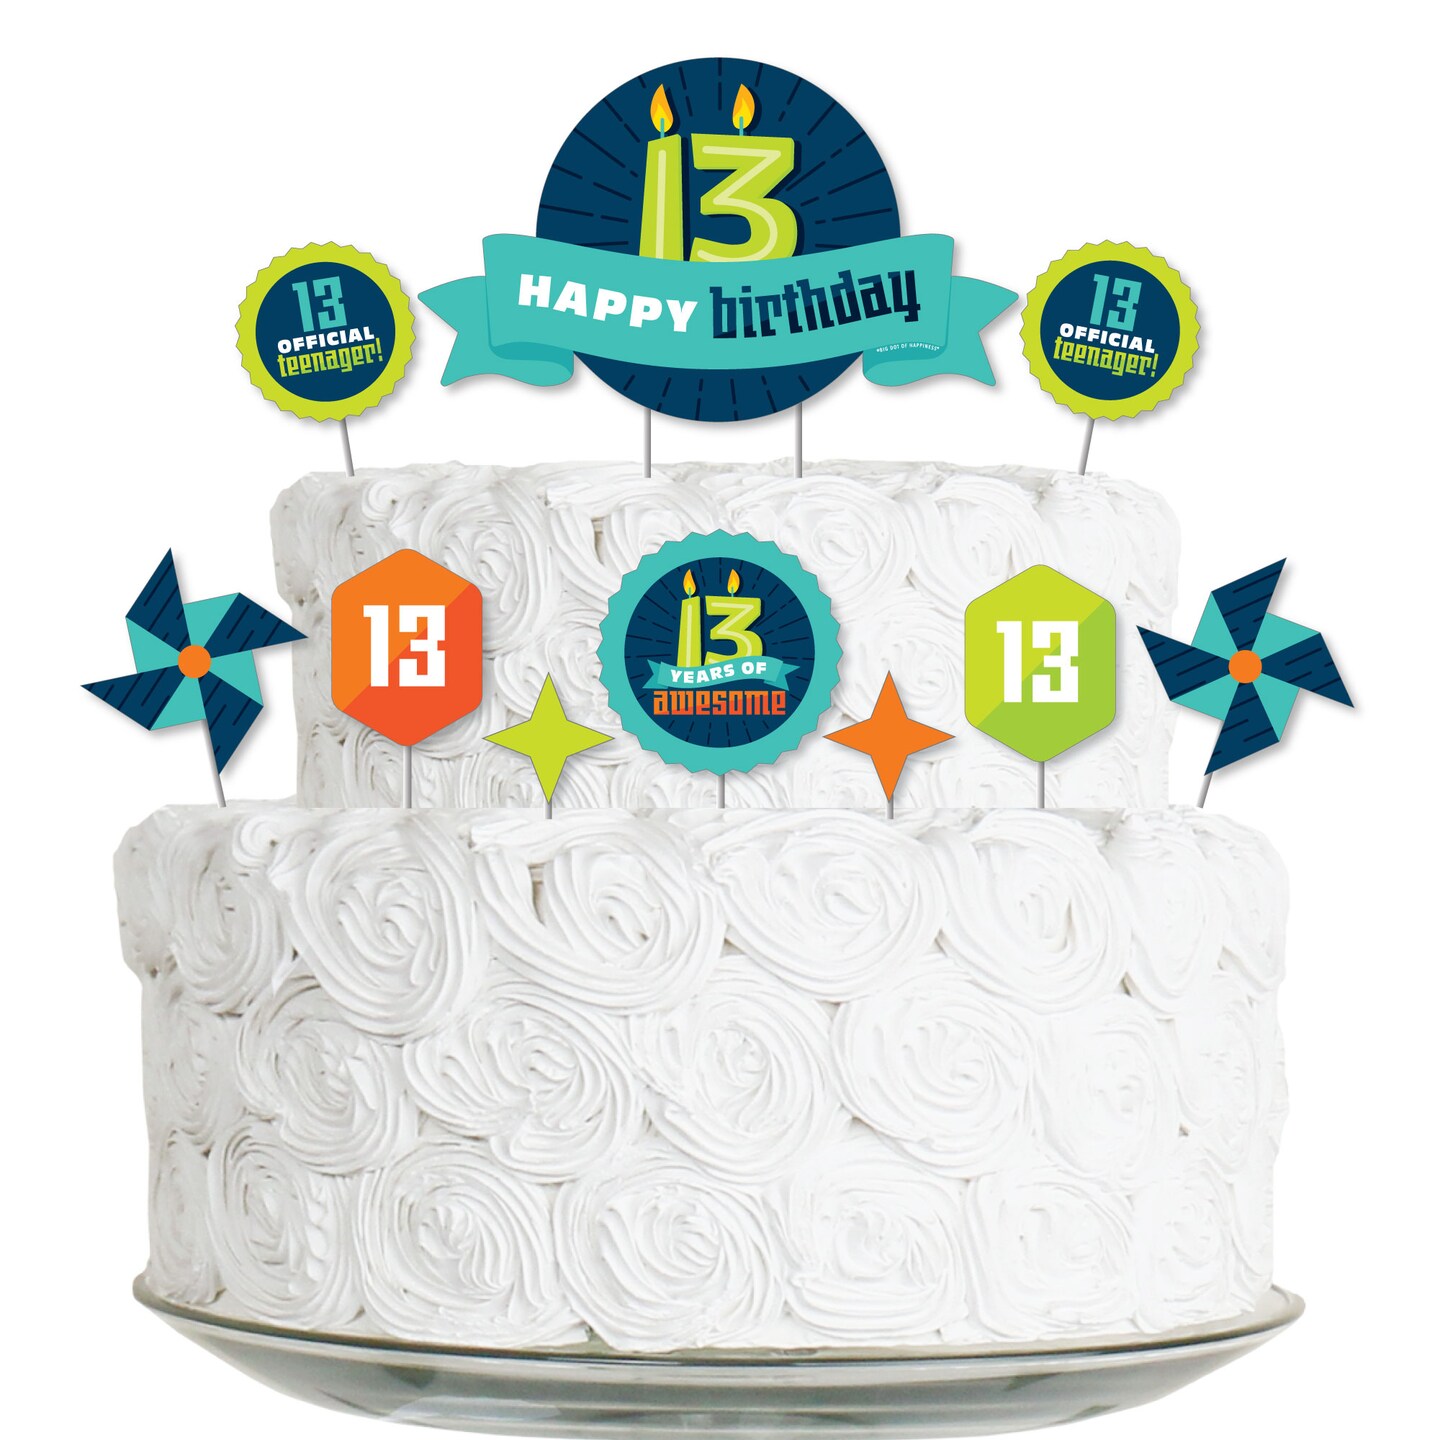 Happy 13th birthday cake topper - Cheers for 13 Bahrain | Ubuy